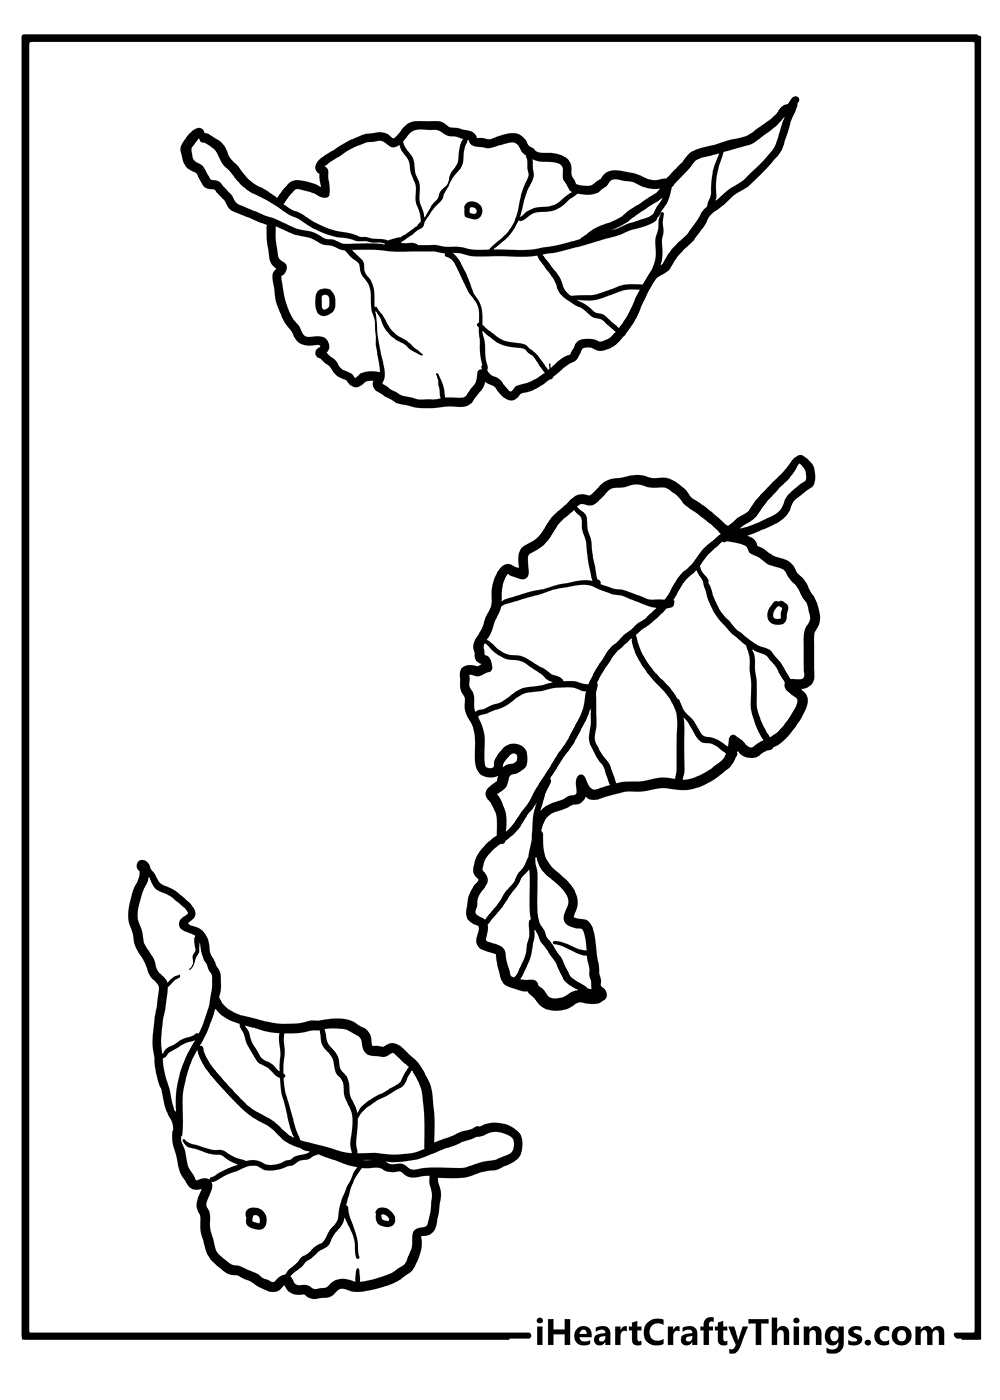 Fall Leaves Coloring Sheet for children free download